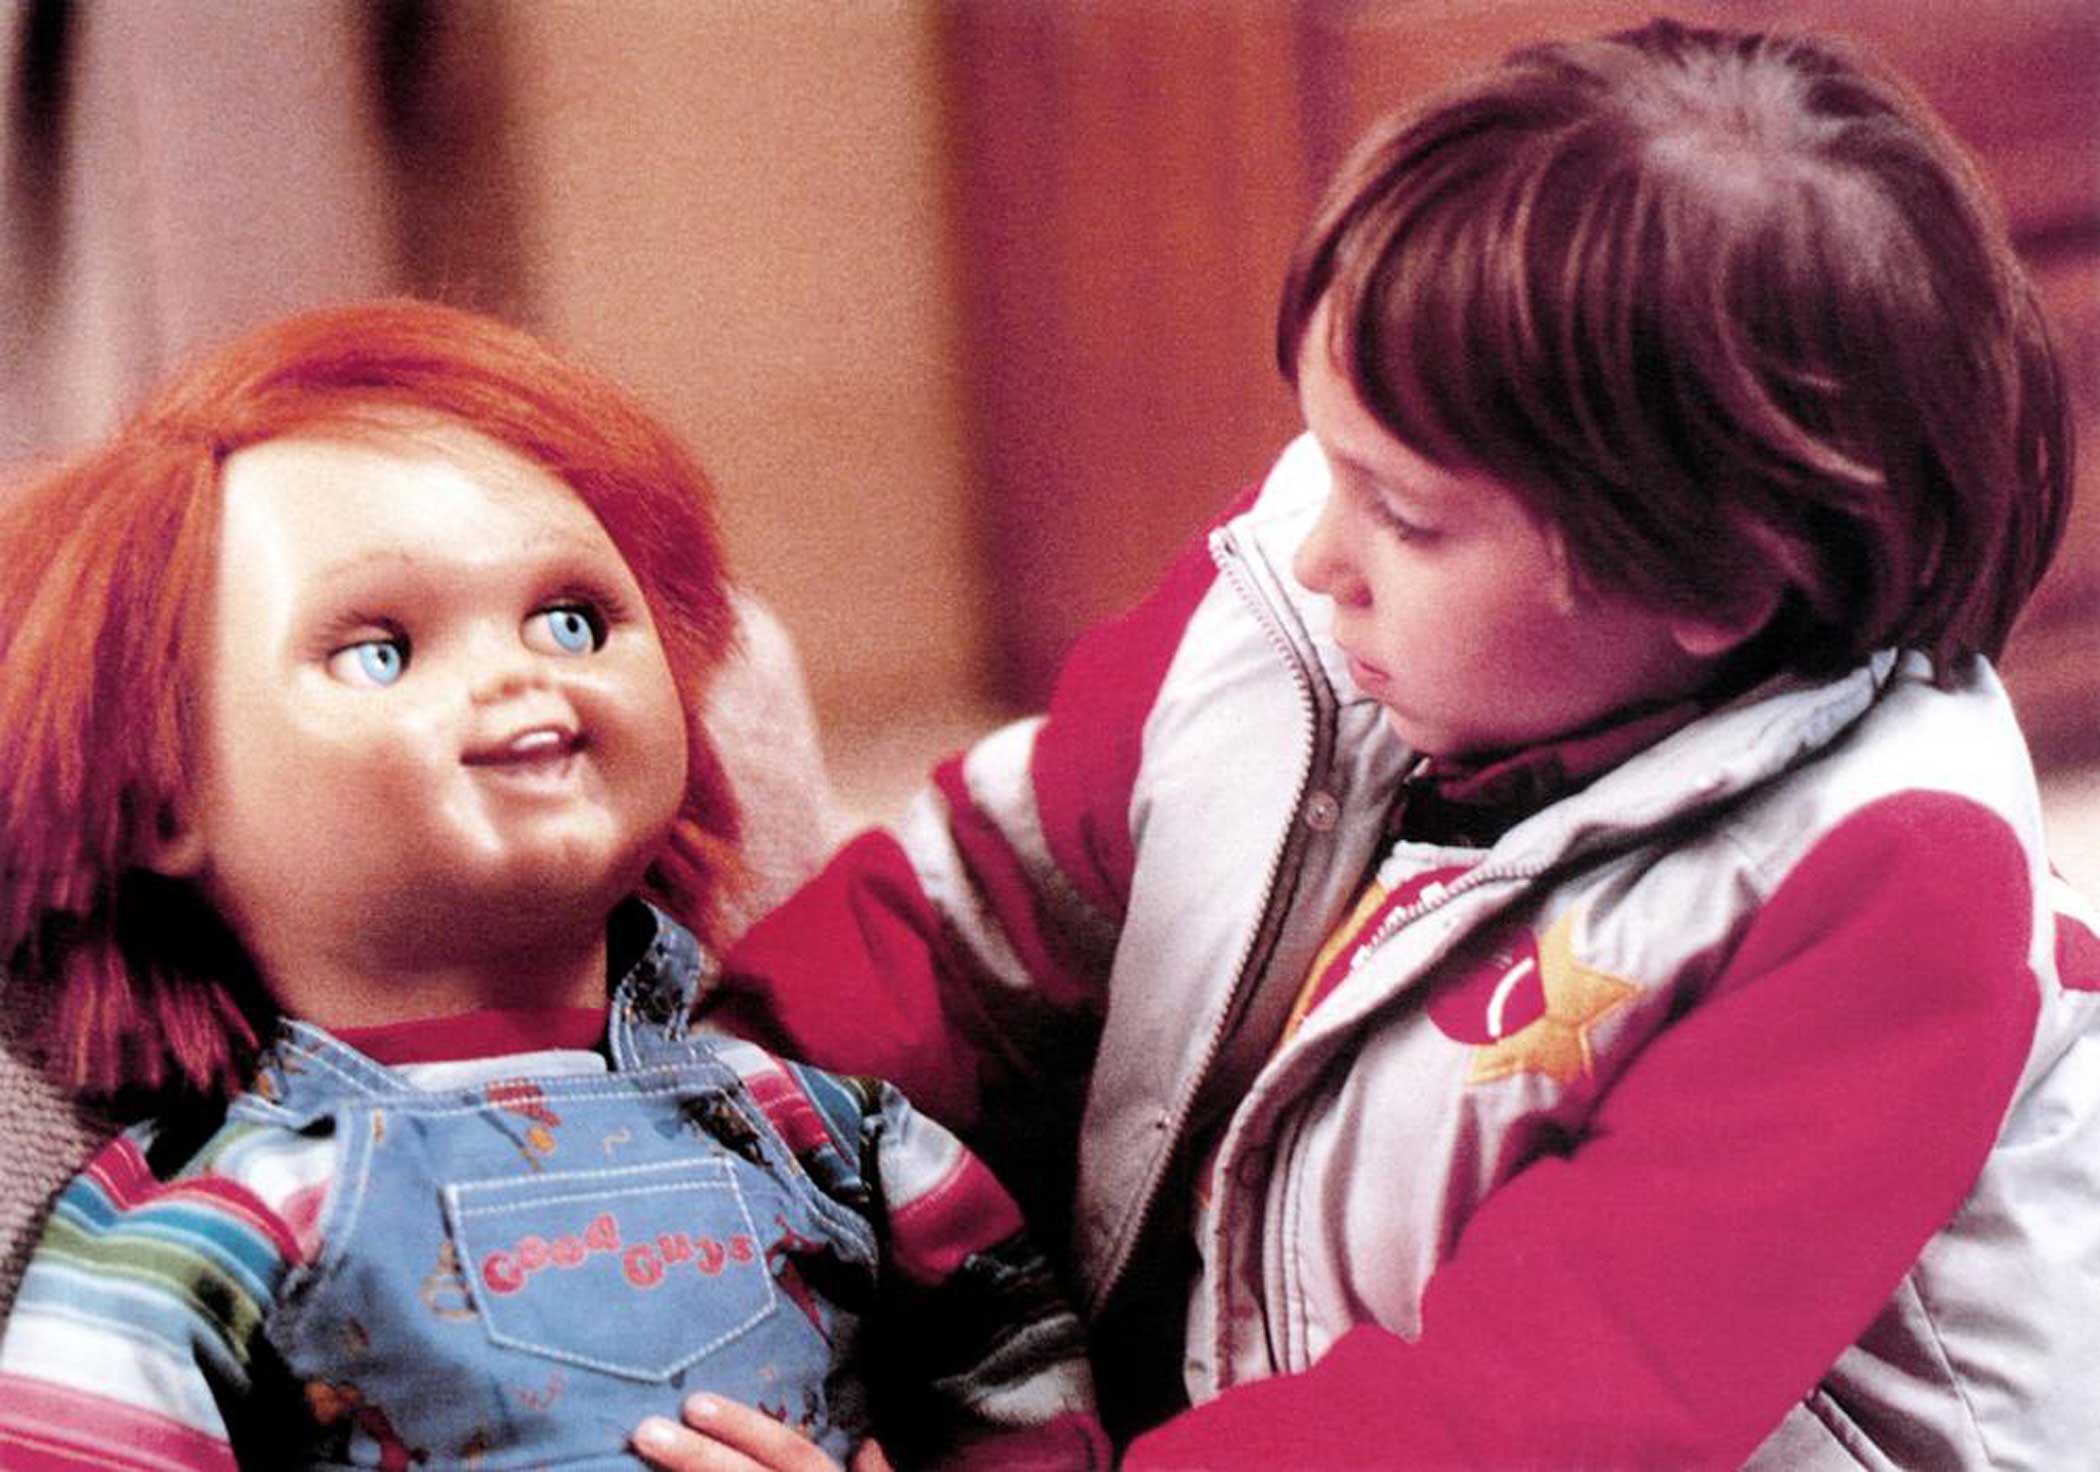 Child's Play, 1988 In 1903, 3-year-old Robert Eugene Otto received a doll as a gift. He named it after himself, and he was inseparable from his new toy. Shortly after, his parents thought they heard voices from the doll, with others claiming they saw the doll glaring at them. Chucky's full name, Charles Lee Ray, is also derived from the names of killers Charles Manson, Lee Harvey Oswald, and James Earl Ray.